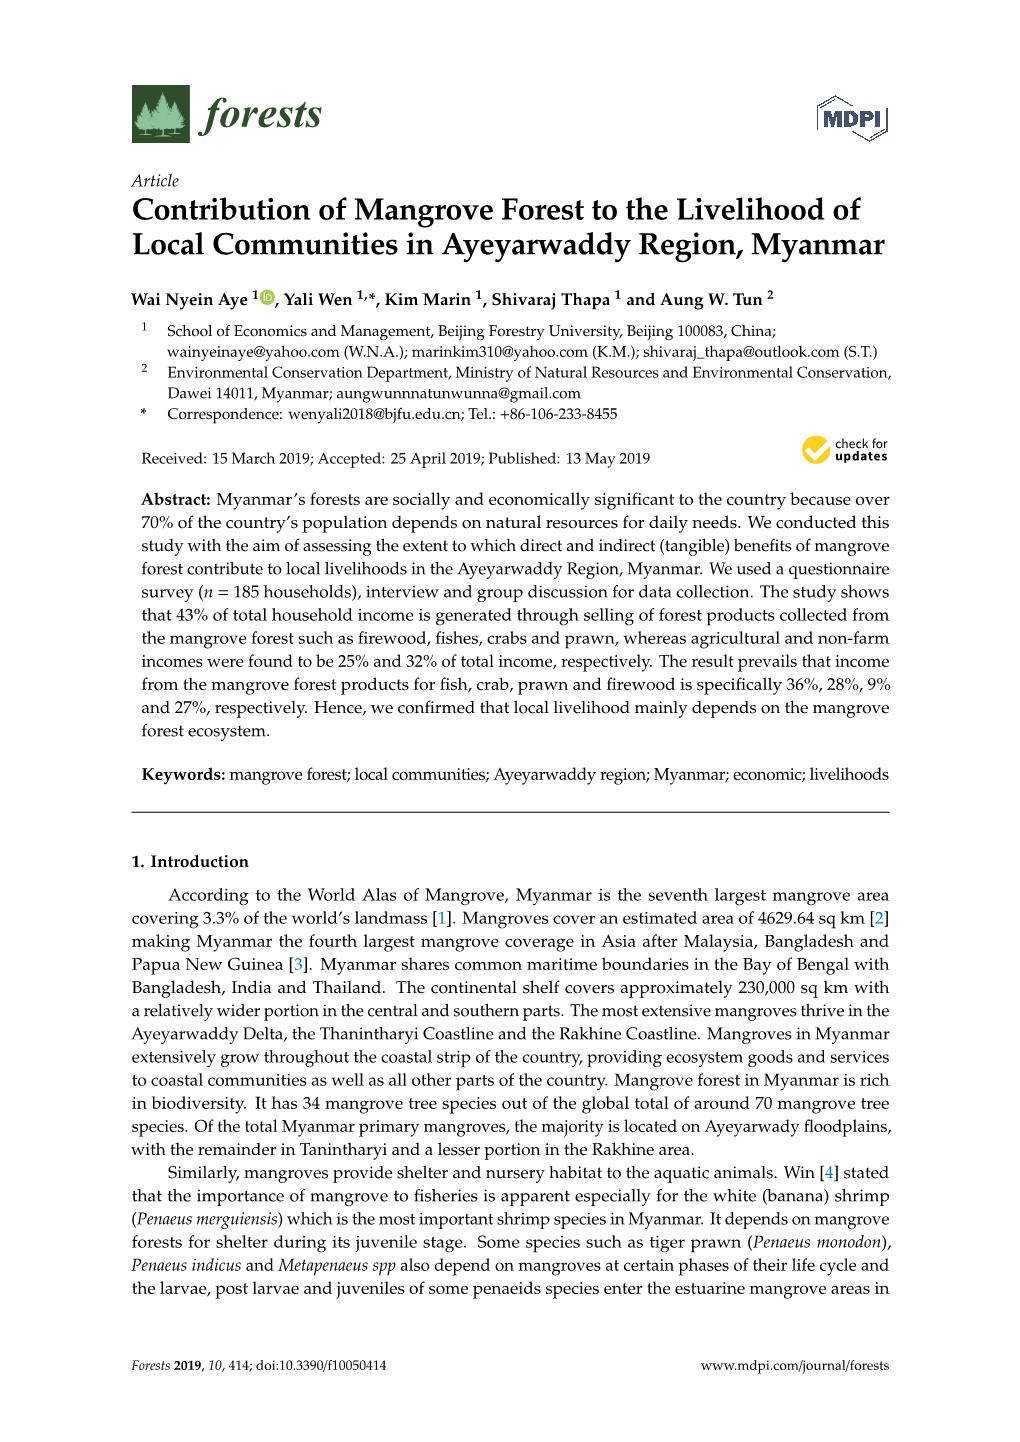 Contribution of Mangrove Forest to the Livelihood of Local Communities in Ayeyarwaddy Region, Myanmar